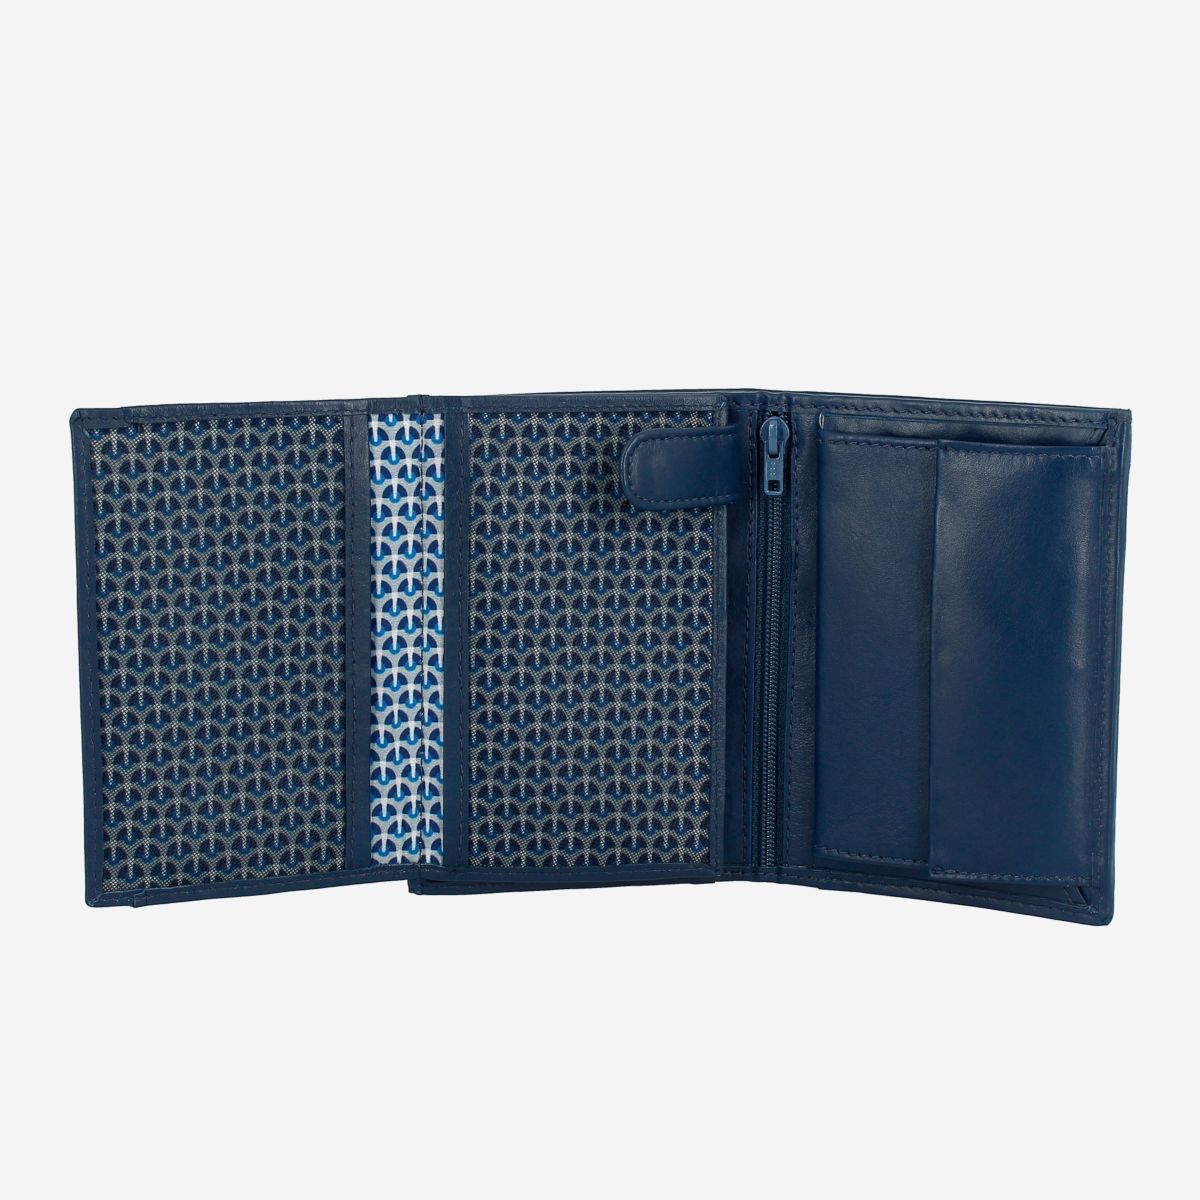 NUVOLA PELLE Mens Vertical Wallet With Coin Pocket - Blue